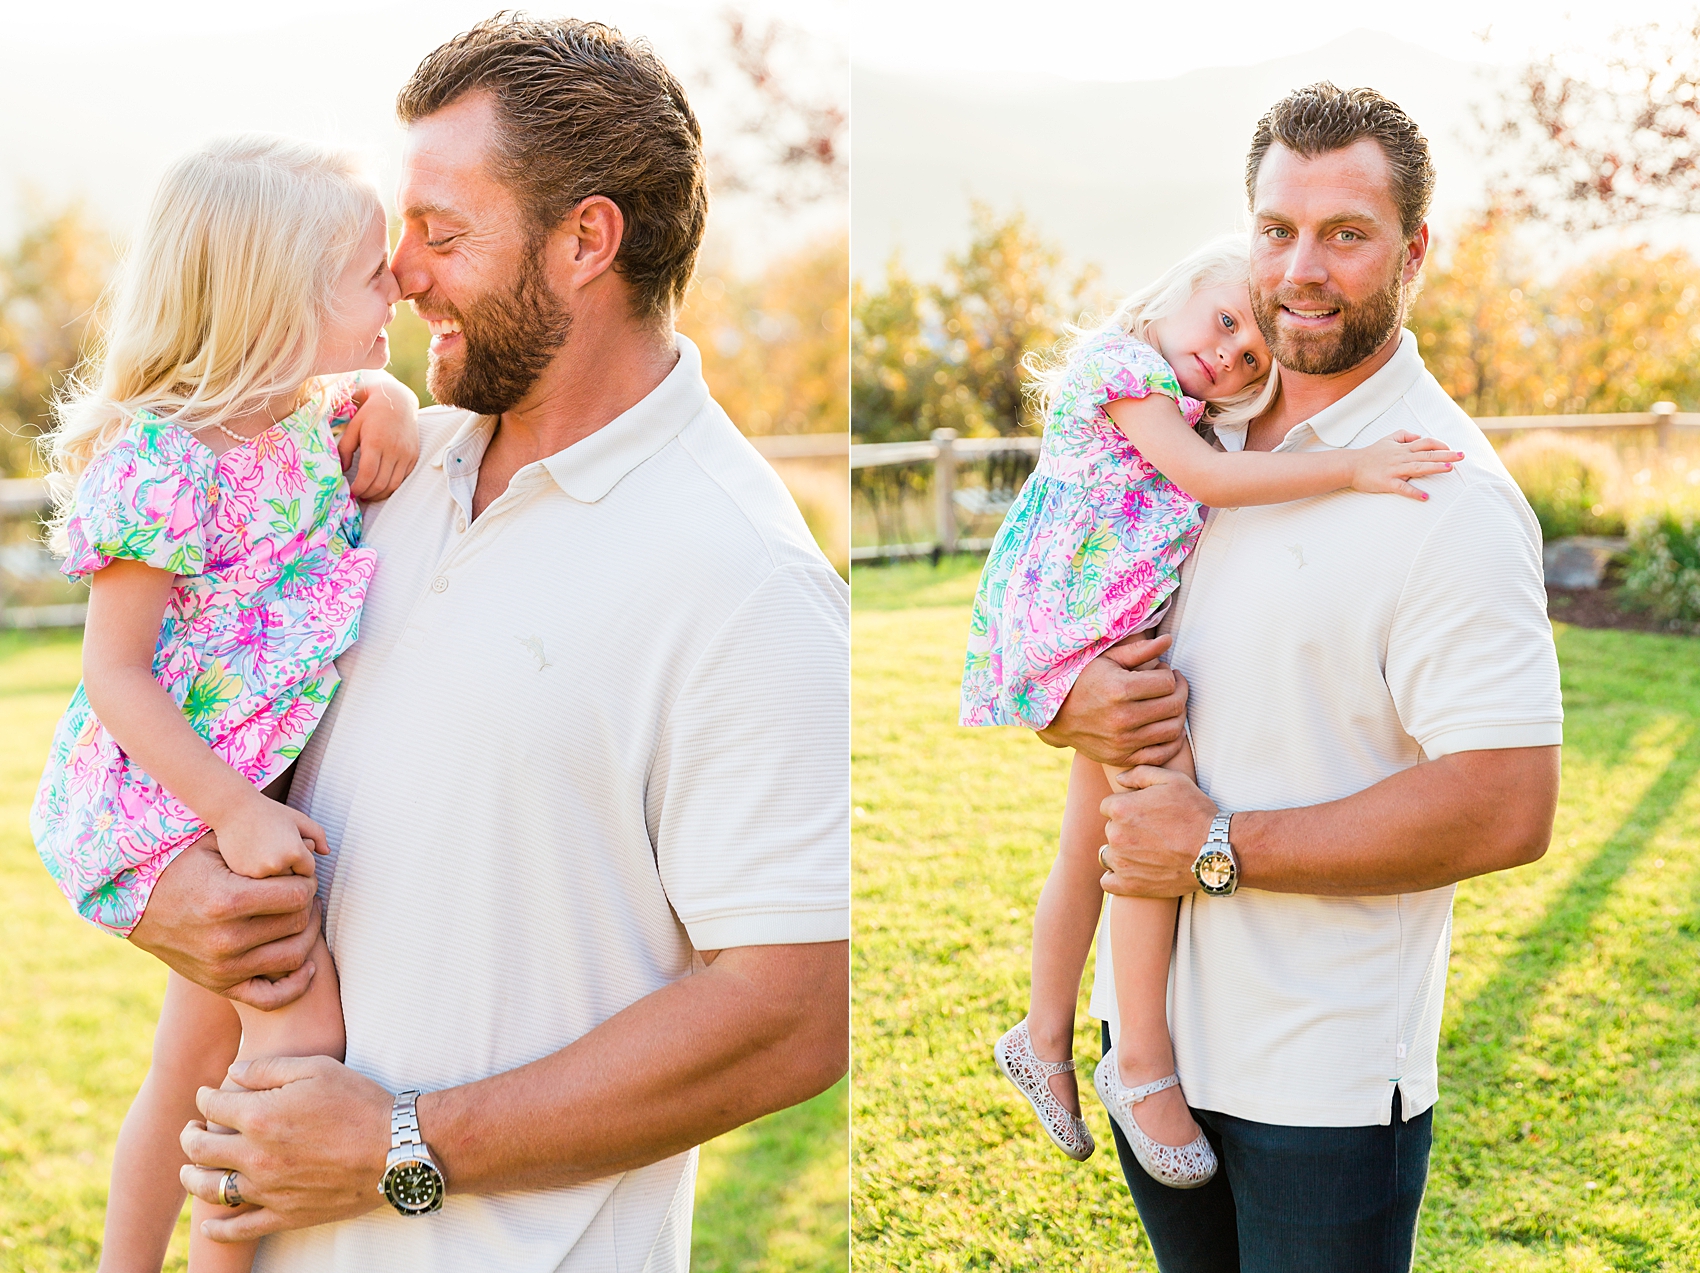 Leah Hope Photography | Salt Lake City Park City Utah Family Photos | Green Nature Mountain Views Backyard Fall Family Pictures | What to Wear | Family Posing Poses | Scottsdale Photographer | Family Child Photographer | Outfits and Styling Ideas | Family Photography | Matching Outfits